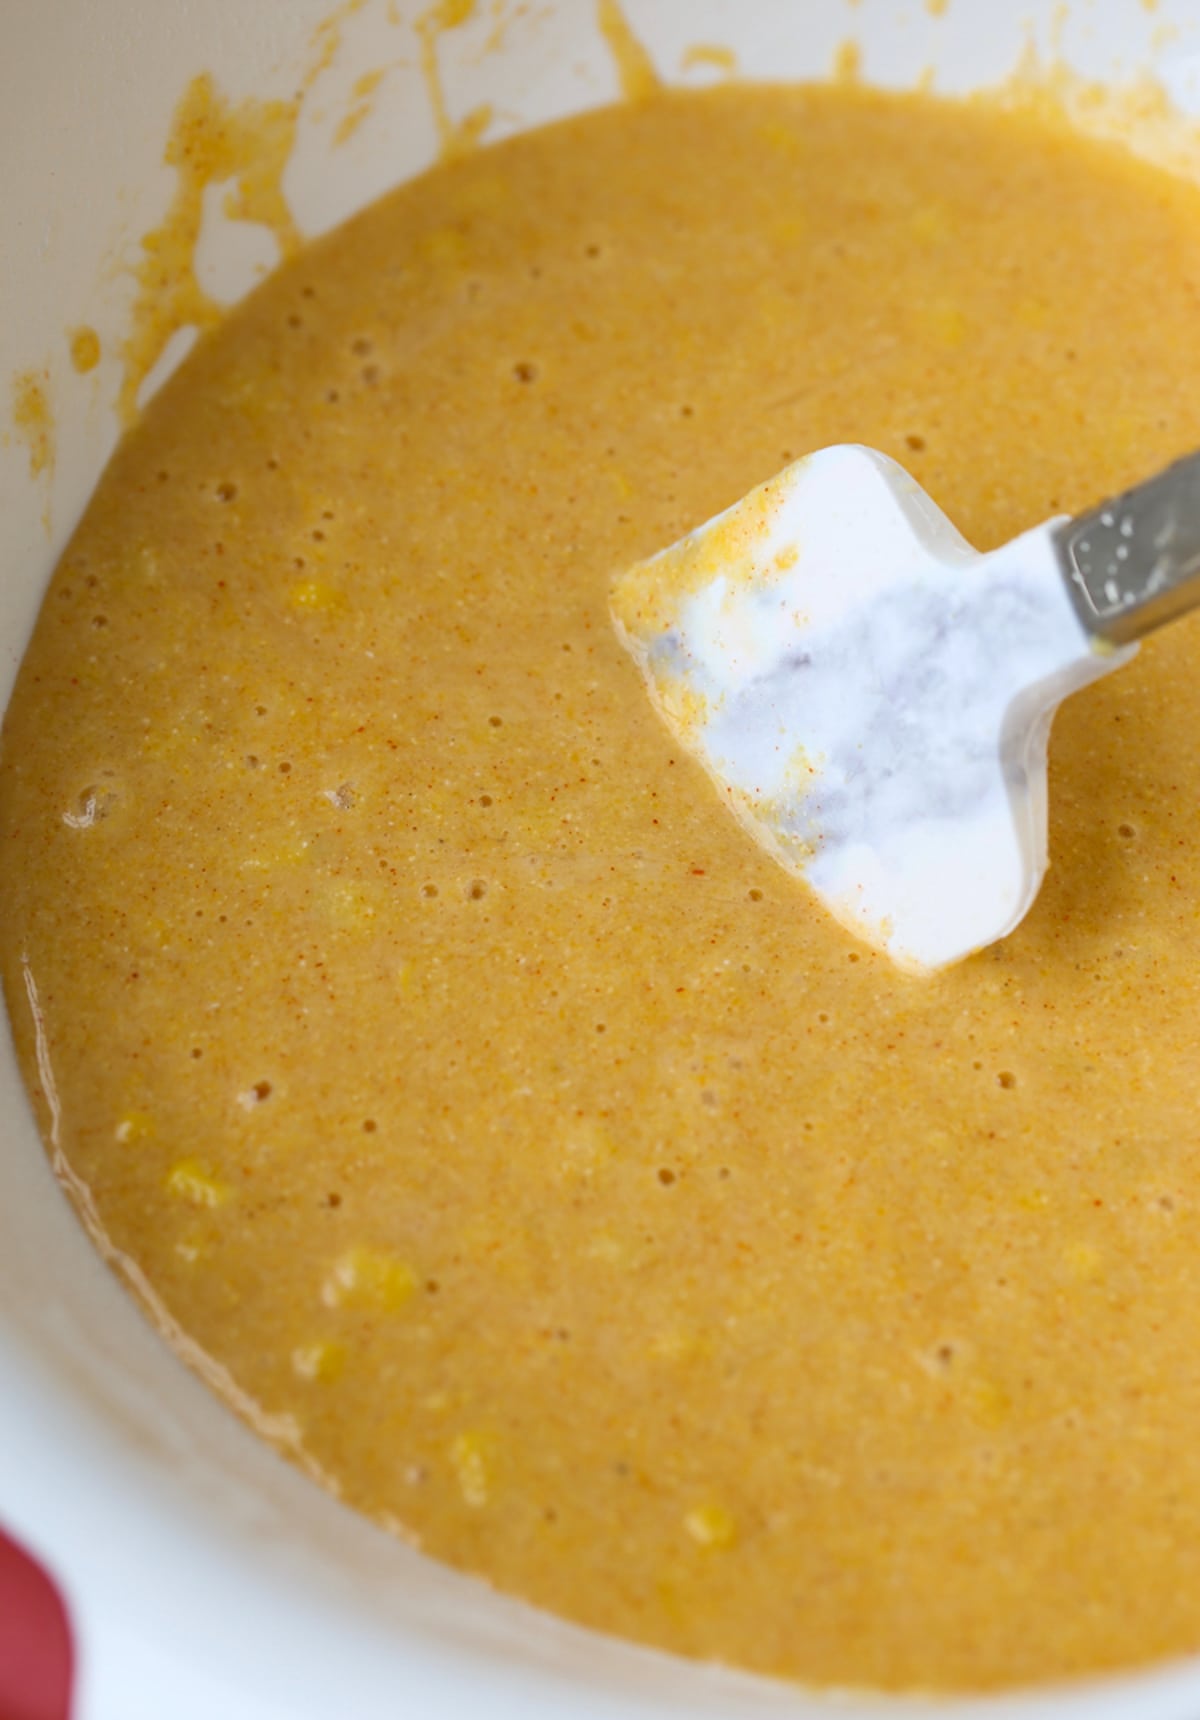 Mixing corn bread batter in a white bowl with a rubber spatula